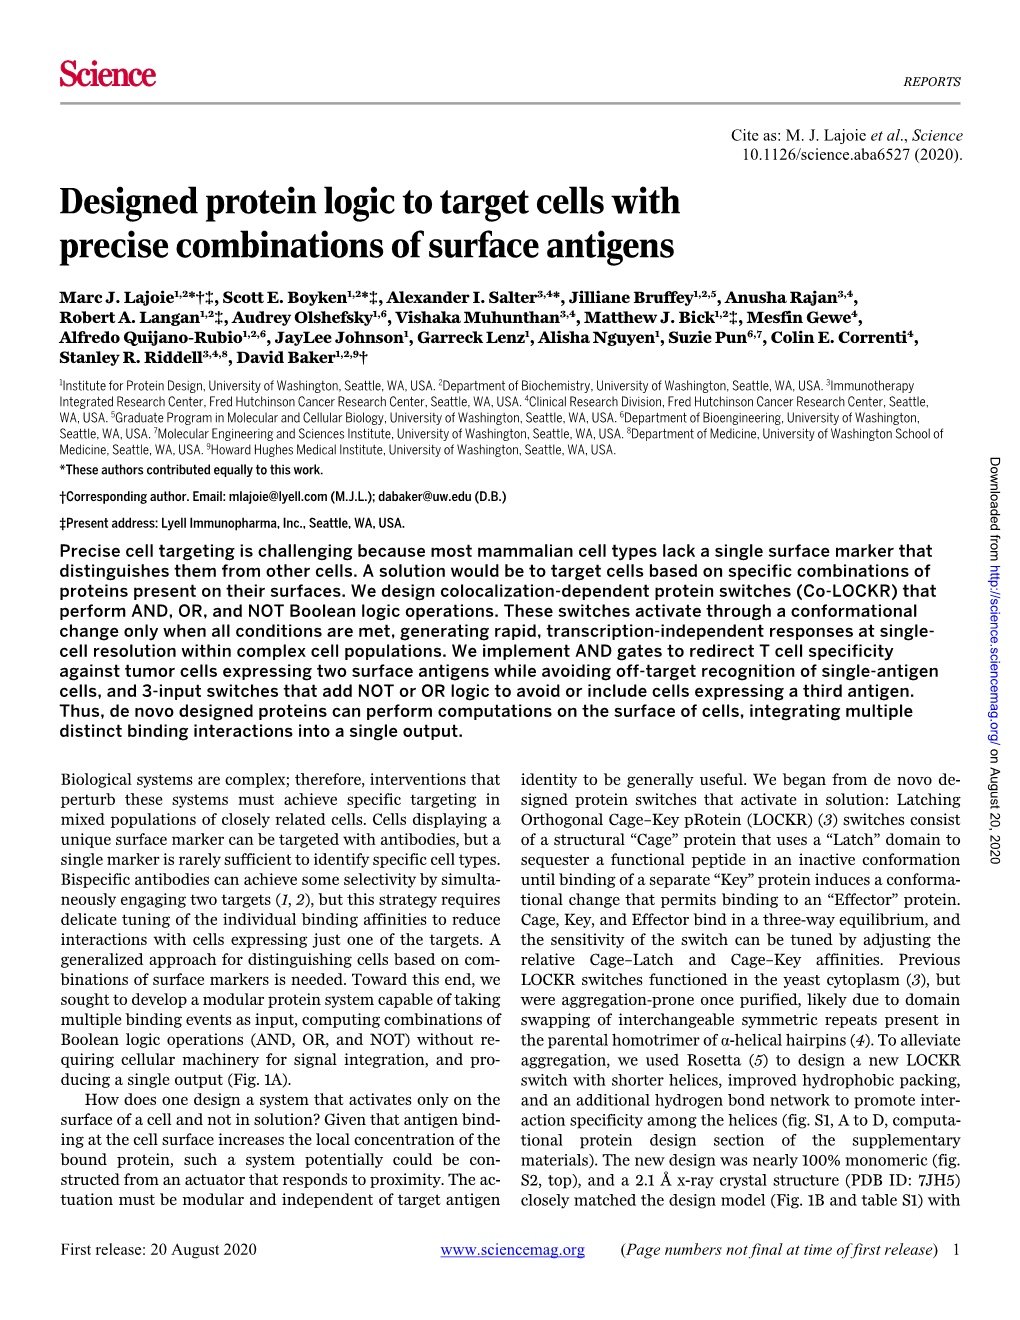 Designed Protein Logic to Target Cells with Precise Combinations of Surface Antigens